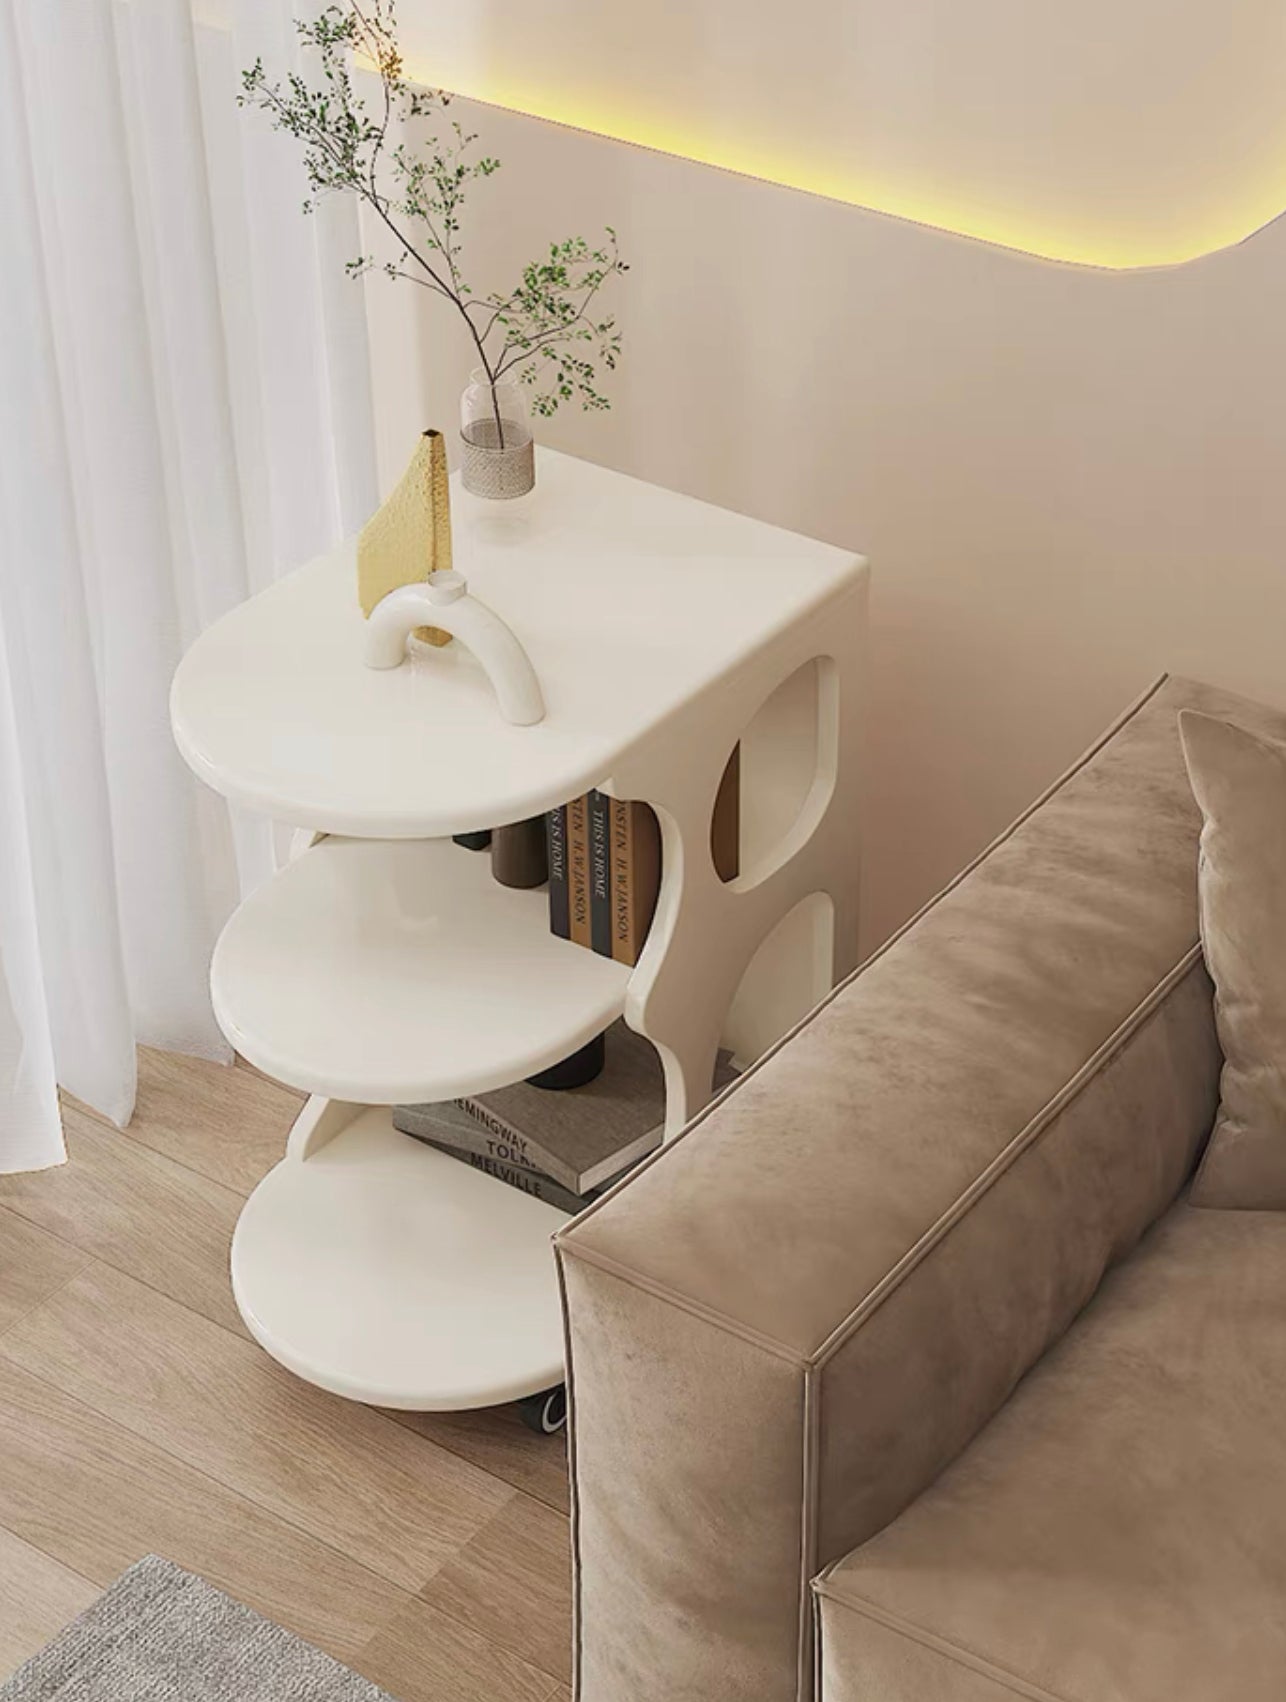 Side Table with Display FINAL SALE (NO EXCHANGE OR RETURN)